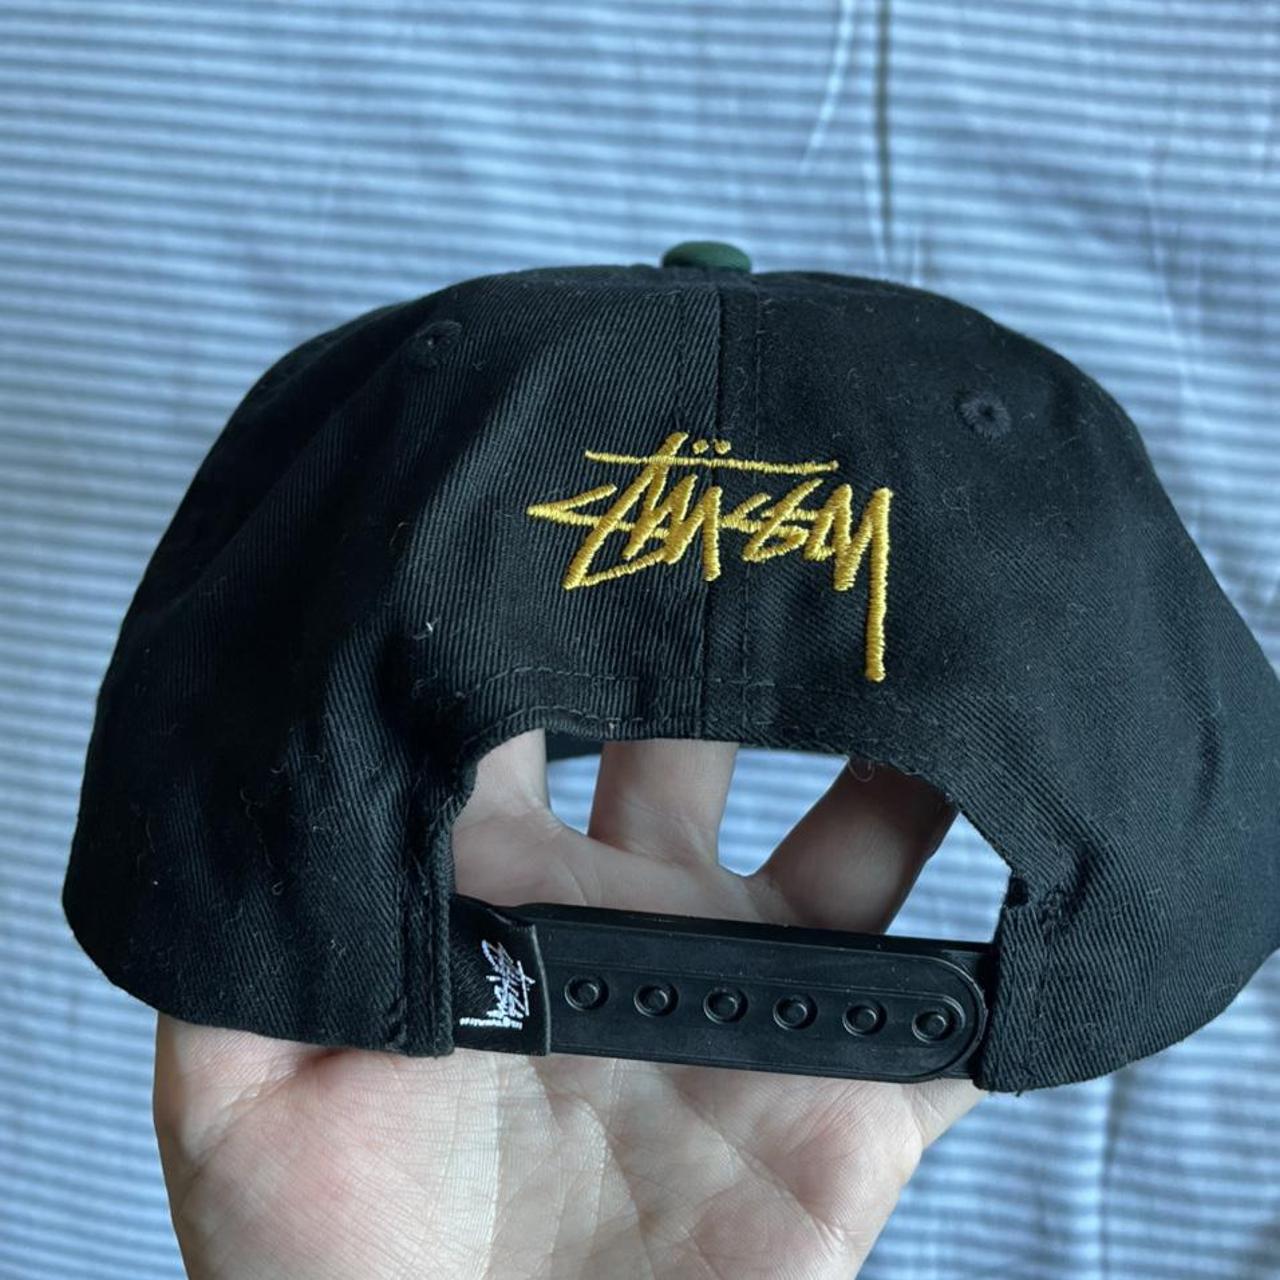 Product Image 2 - Stussy two toned hat. Never